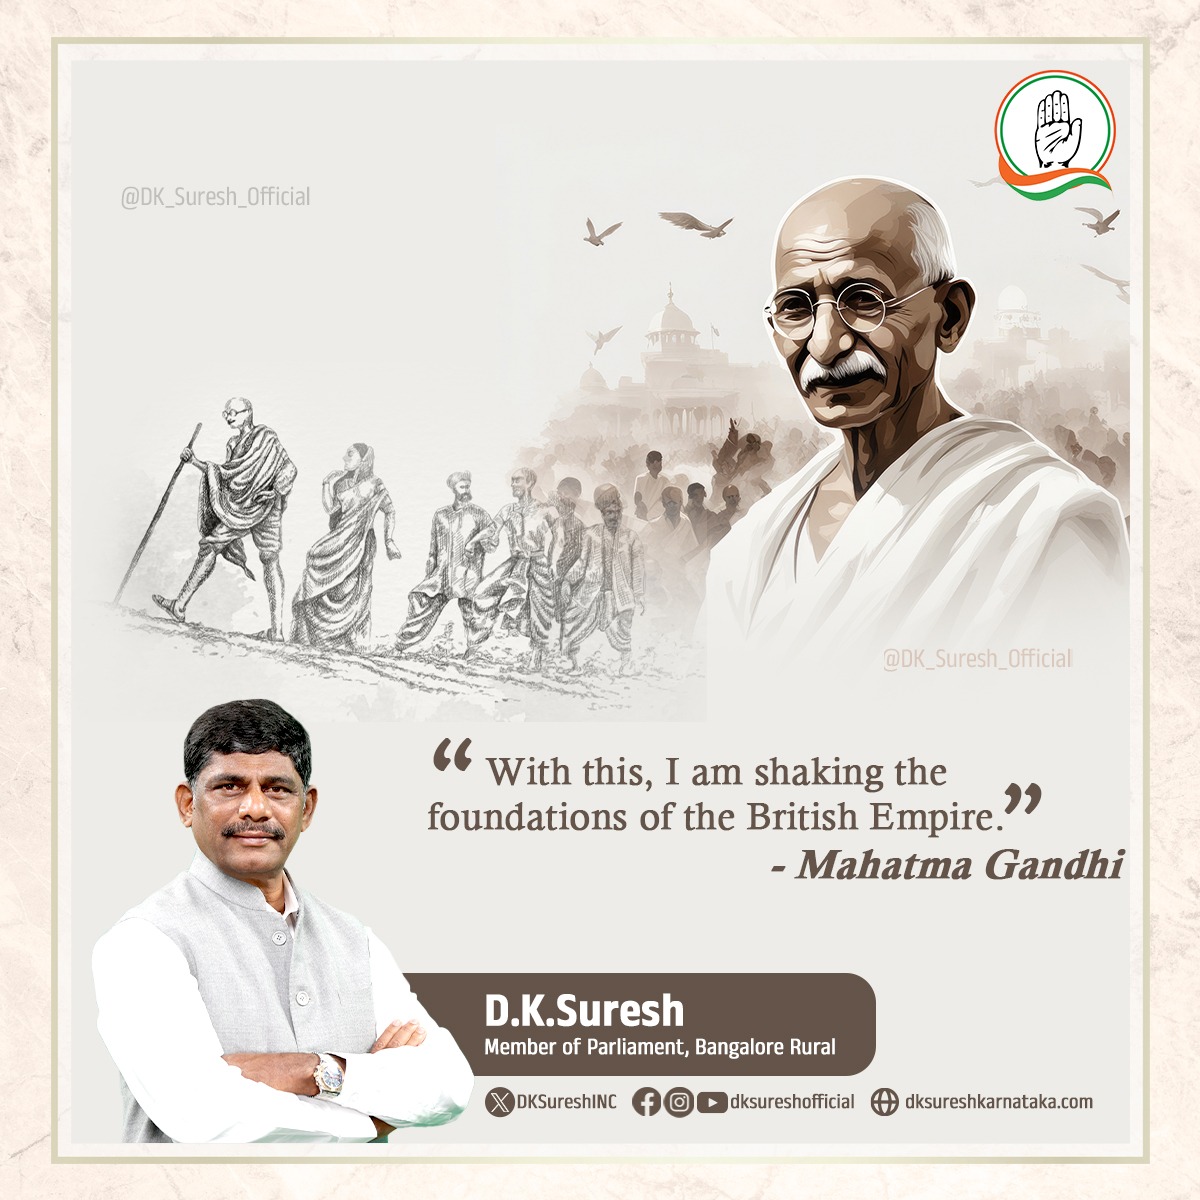 A pinch of salt and one of the largest non violence movements in India!

My tributes to the resilient brave souls who took part in this historic movement. Their sacrifices in upholding the principles of nonviolence and unity continue to inspire us even today.

#SaltSatyagraha